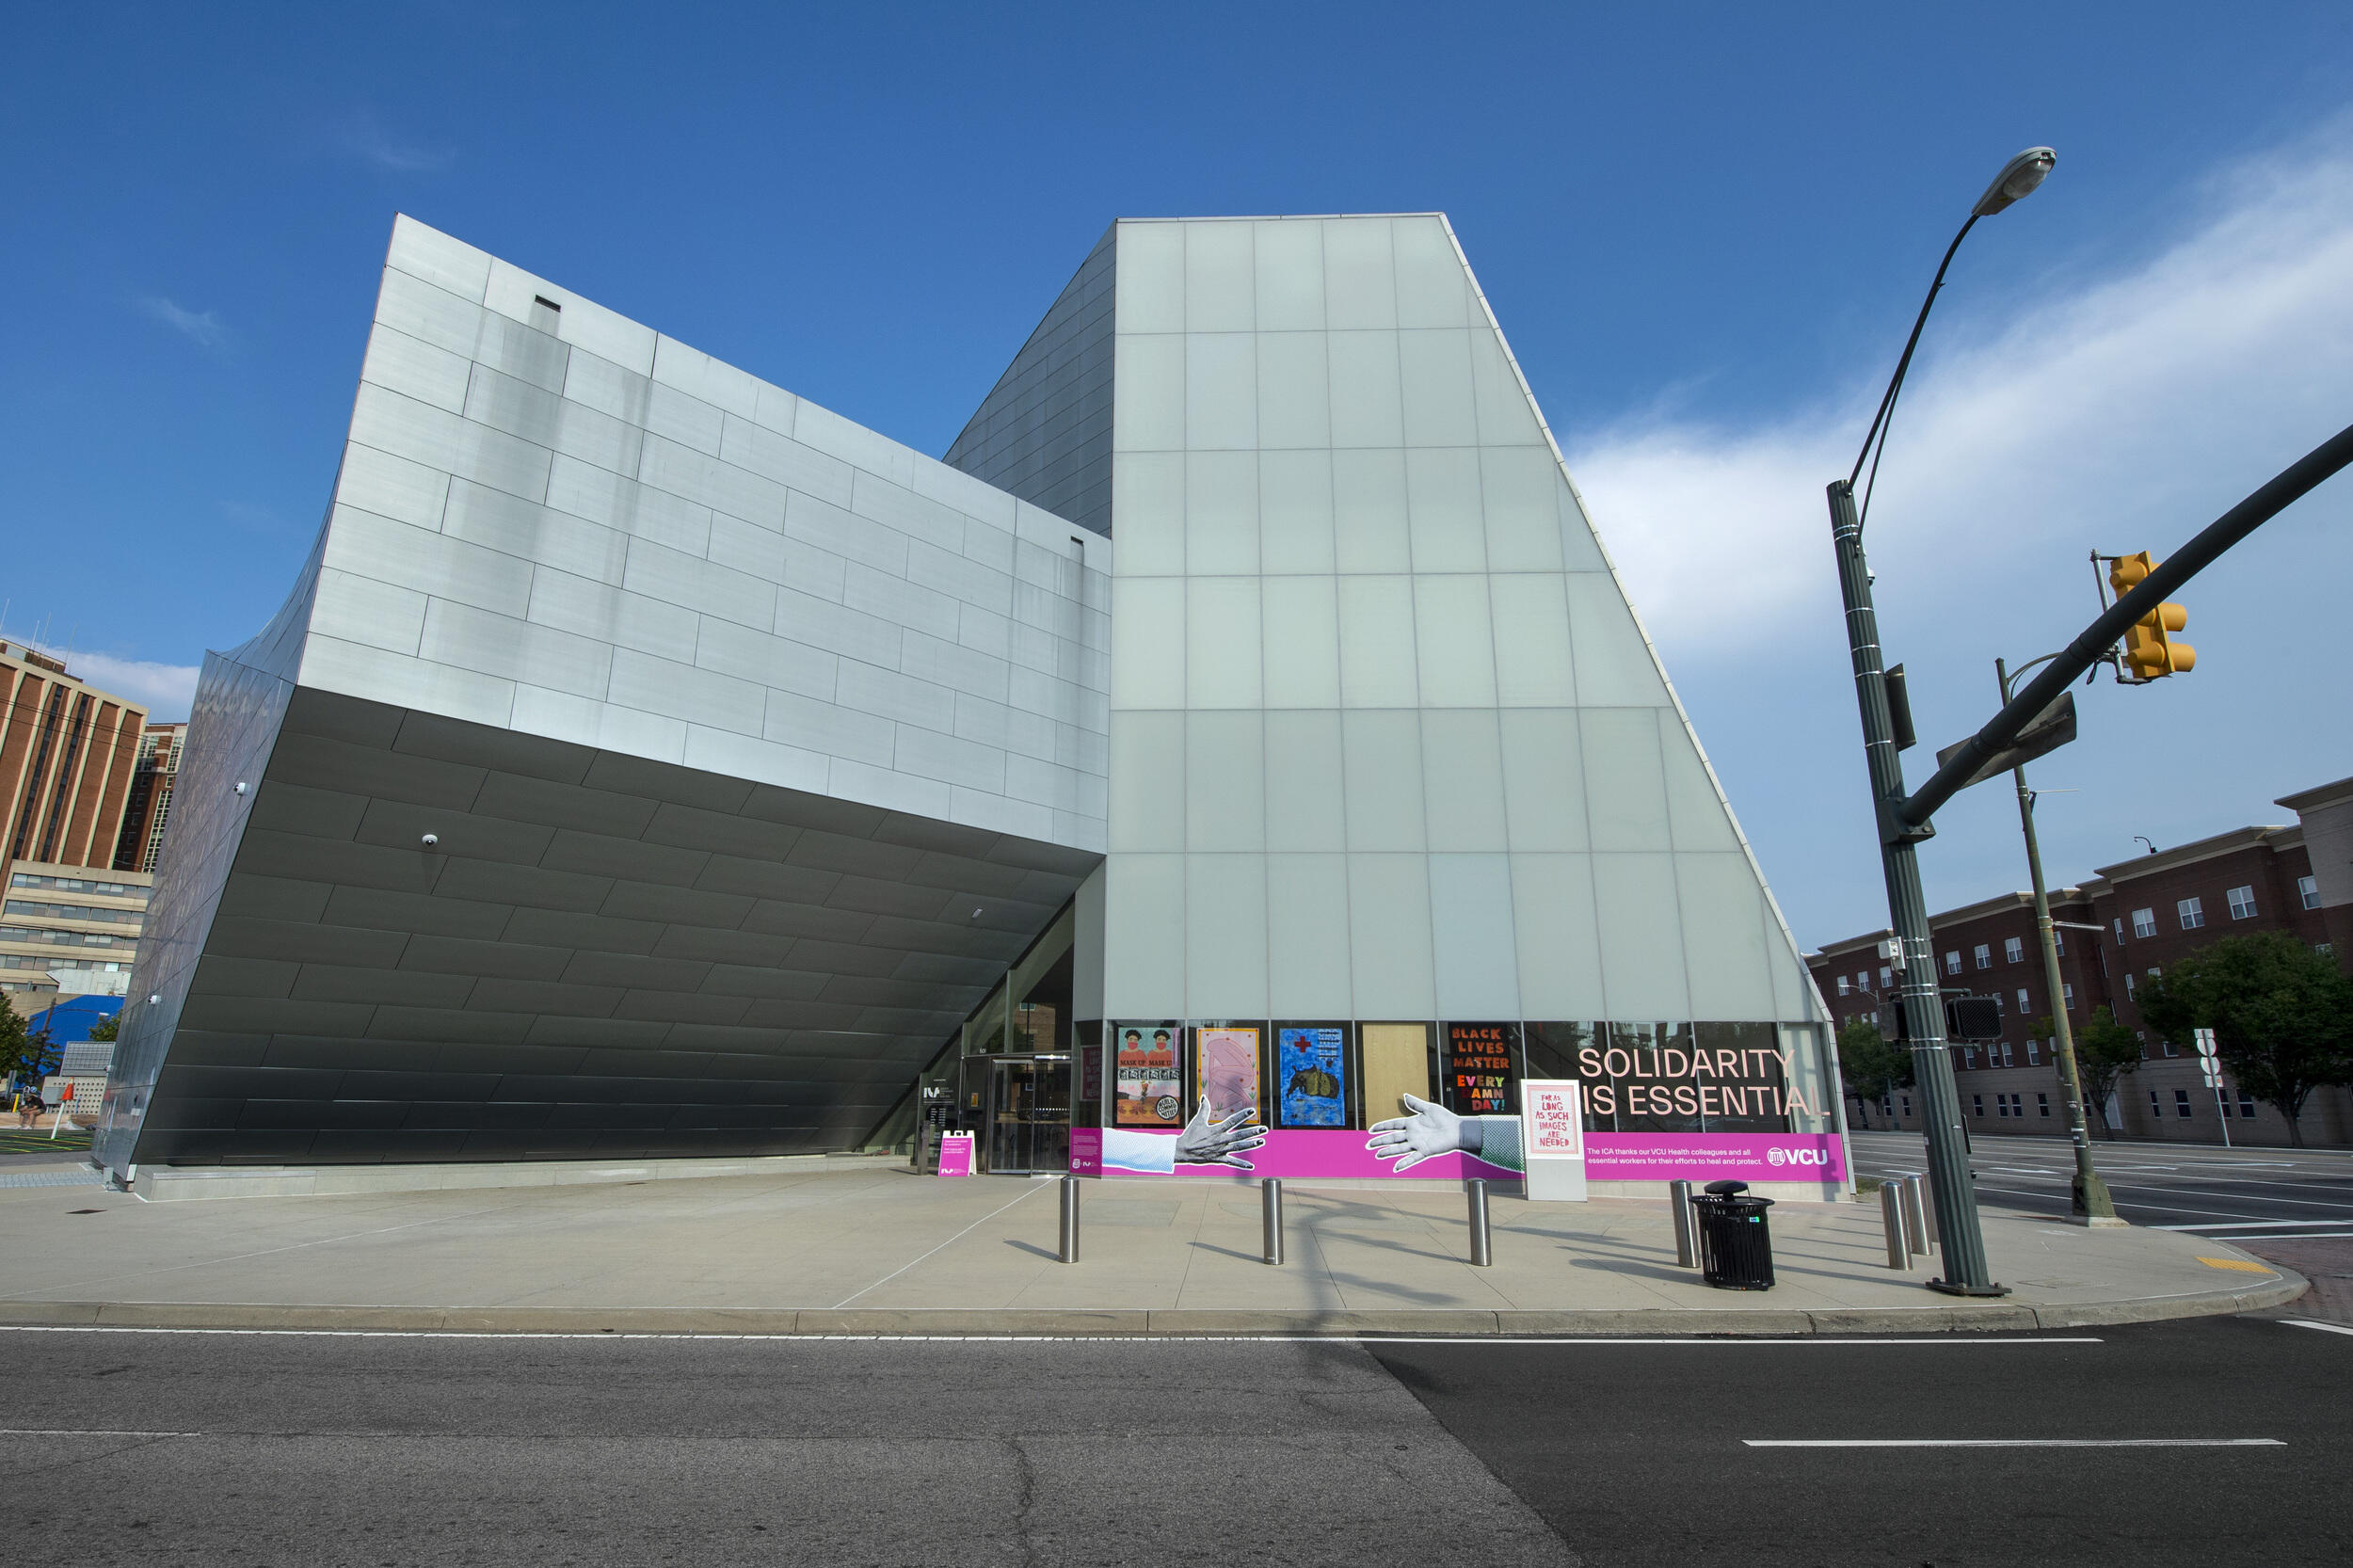 The Institute for Contemporary Art as viewed from Belvidere Street.